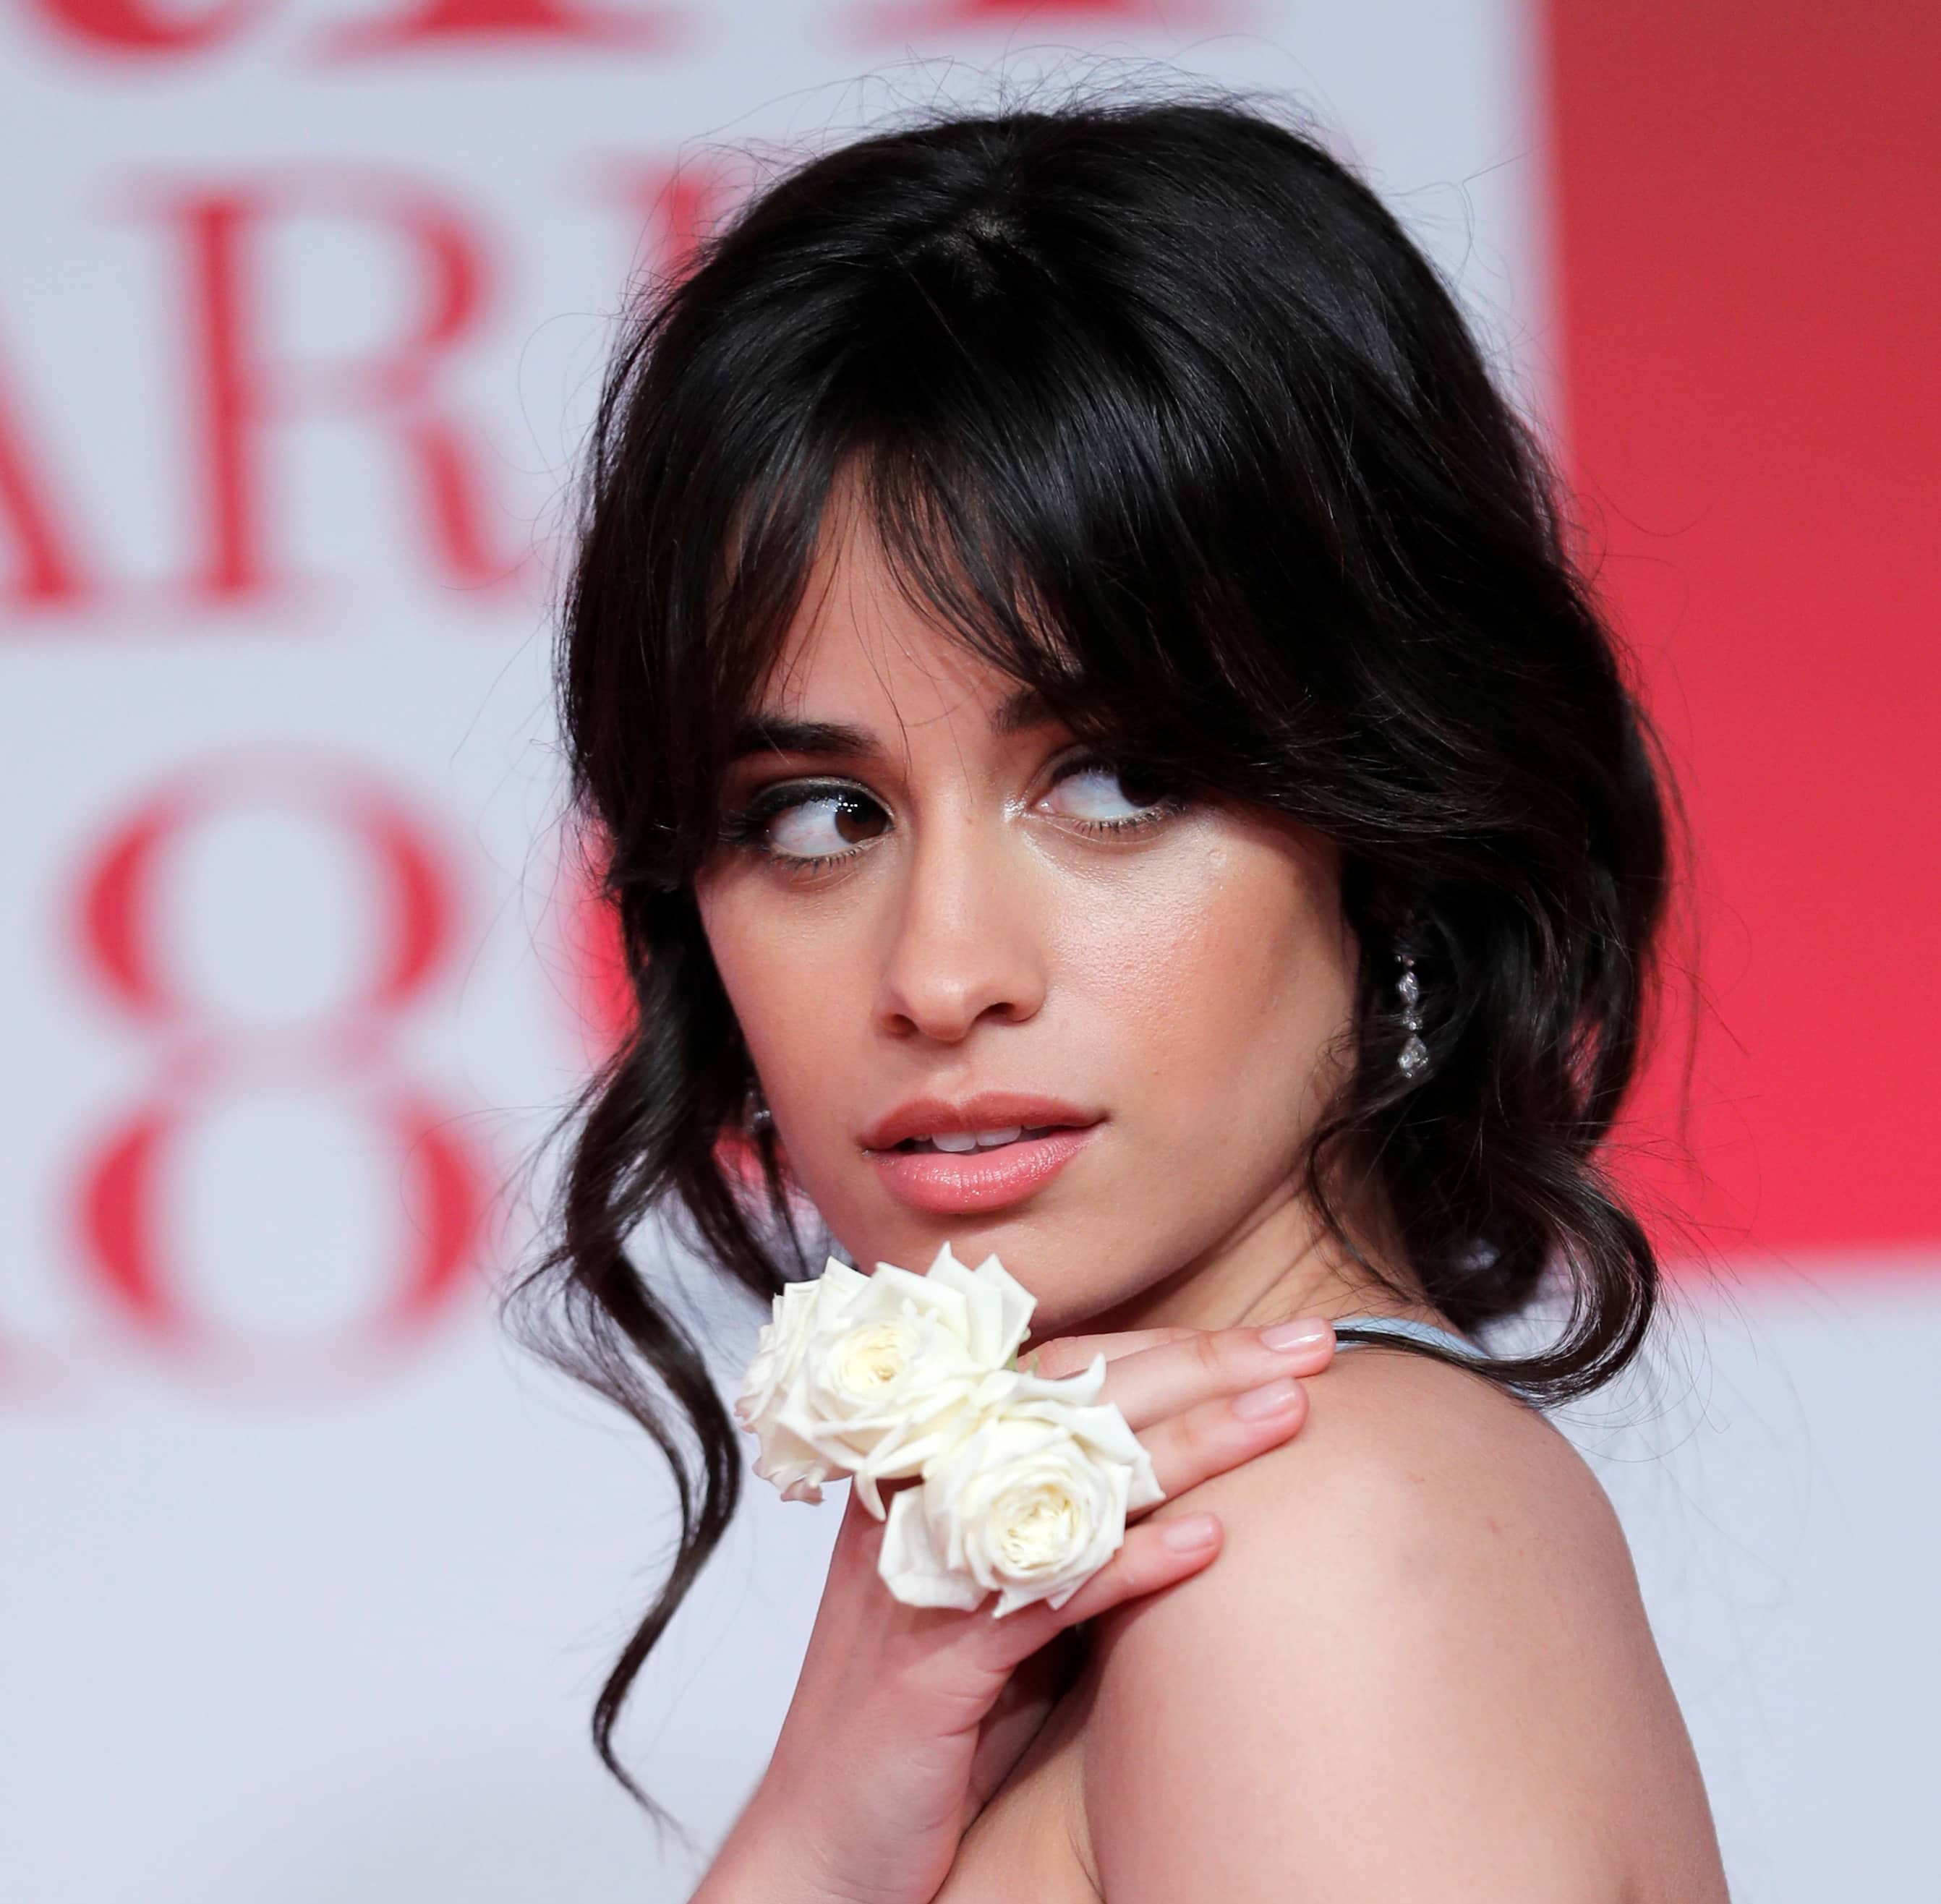 camila-cabello-arrives-at-the-brit-awards-at-the-o2-arena-in-london